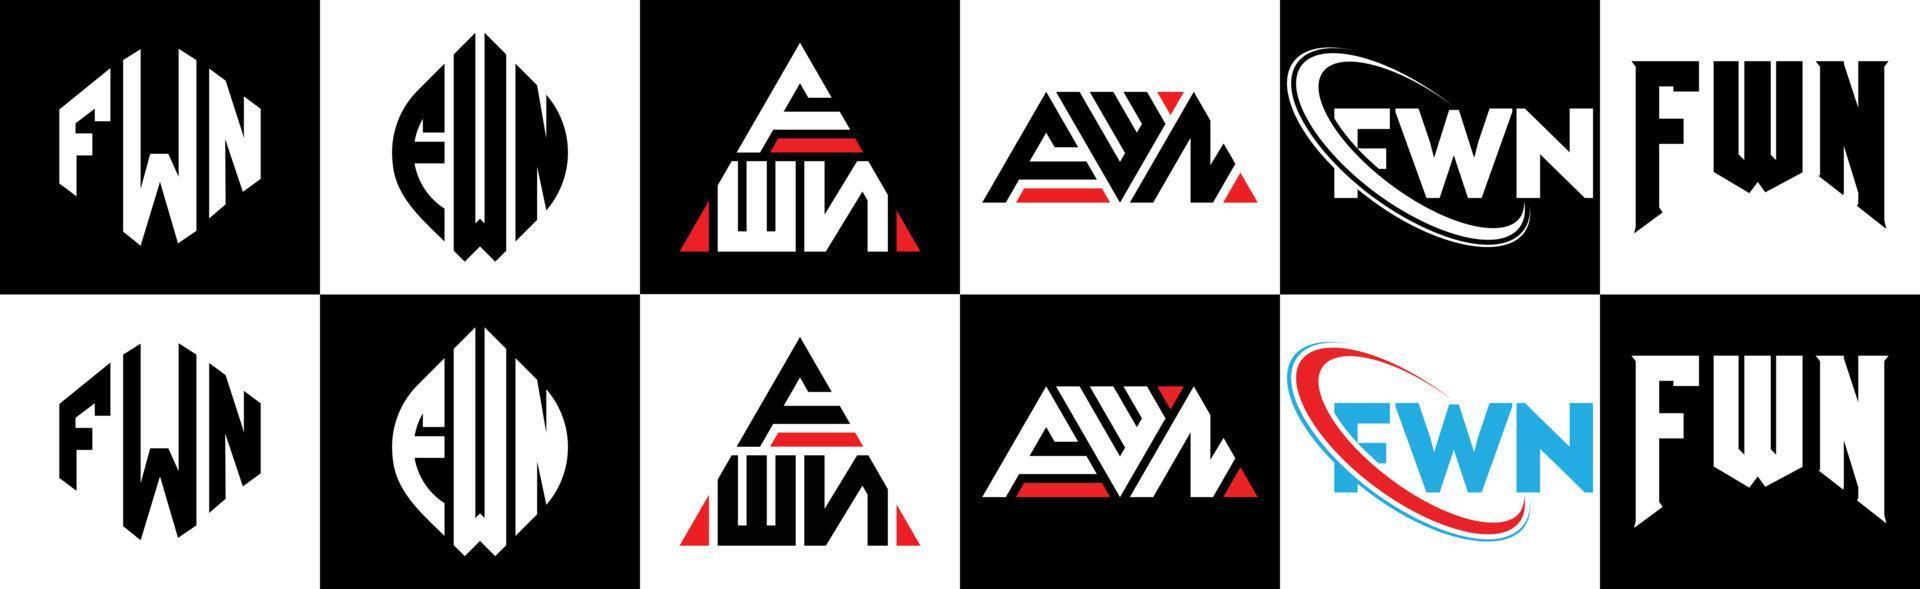 FWN letter logo design in six style. FWN polygon, circle, triangle, hexagon, flat and simple style with black and white color variation letter logo set in one artboard. FWN minimalist and classic logo vector